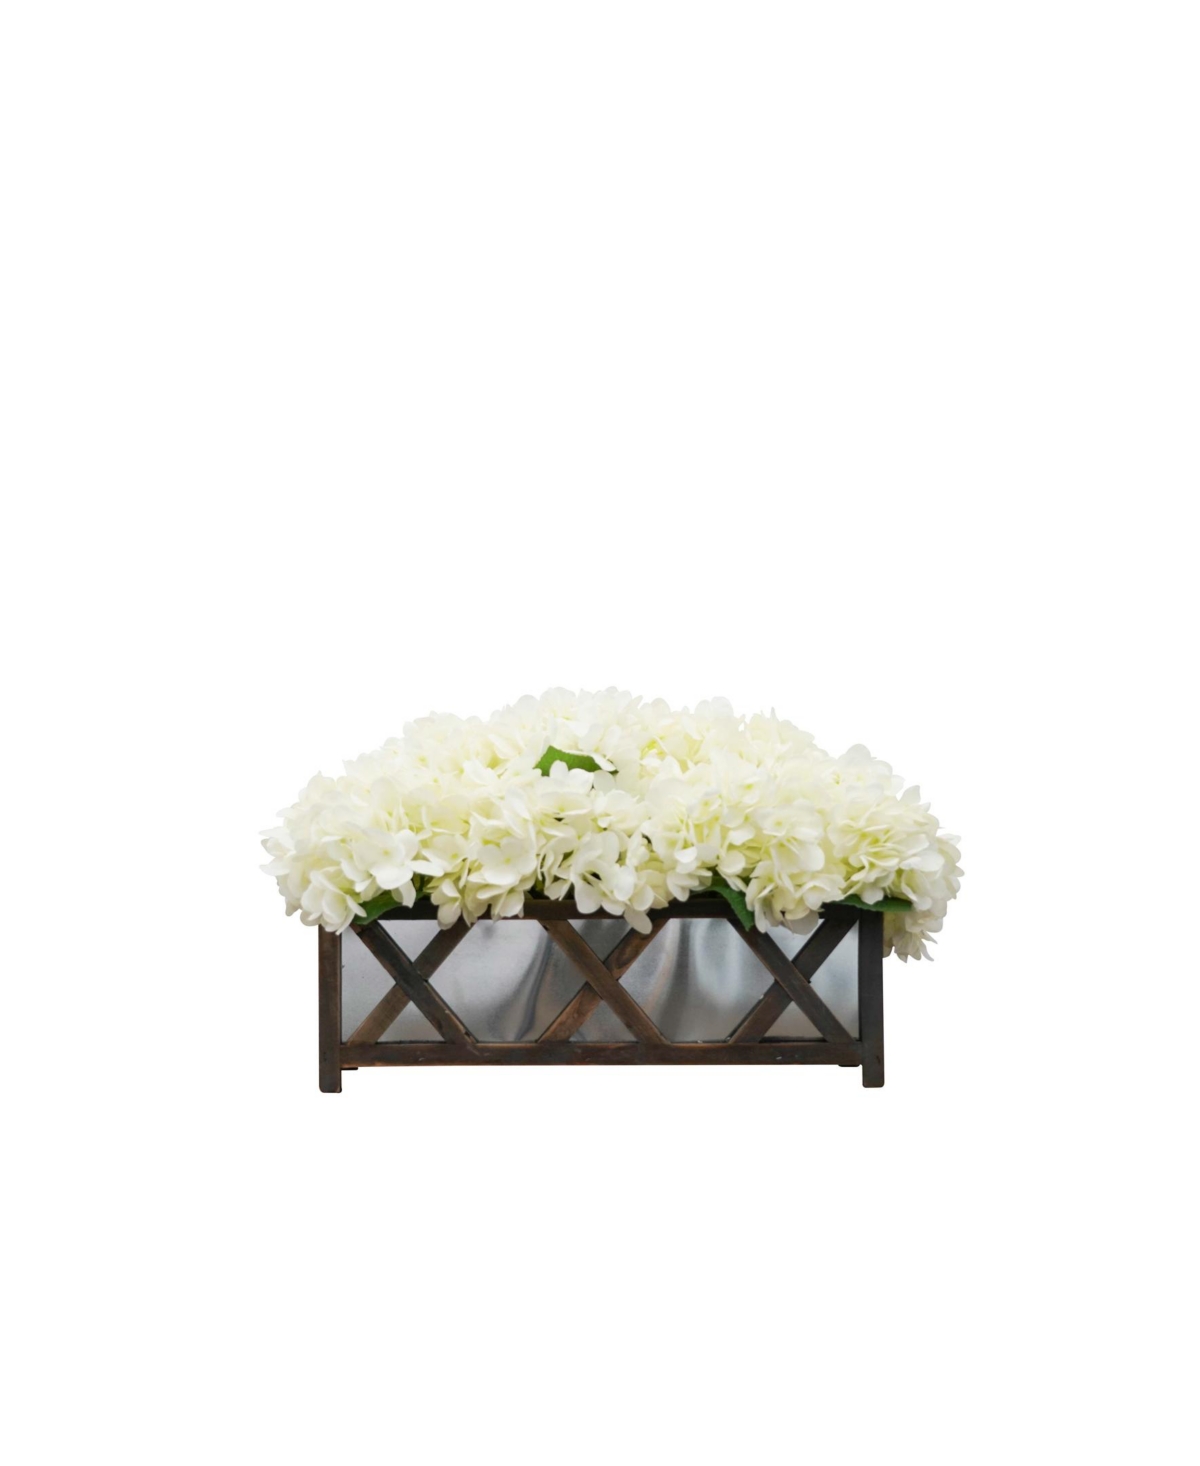 Artificial Hydrangea Ledge in Wood or Tin, 11.5" - Brown